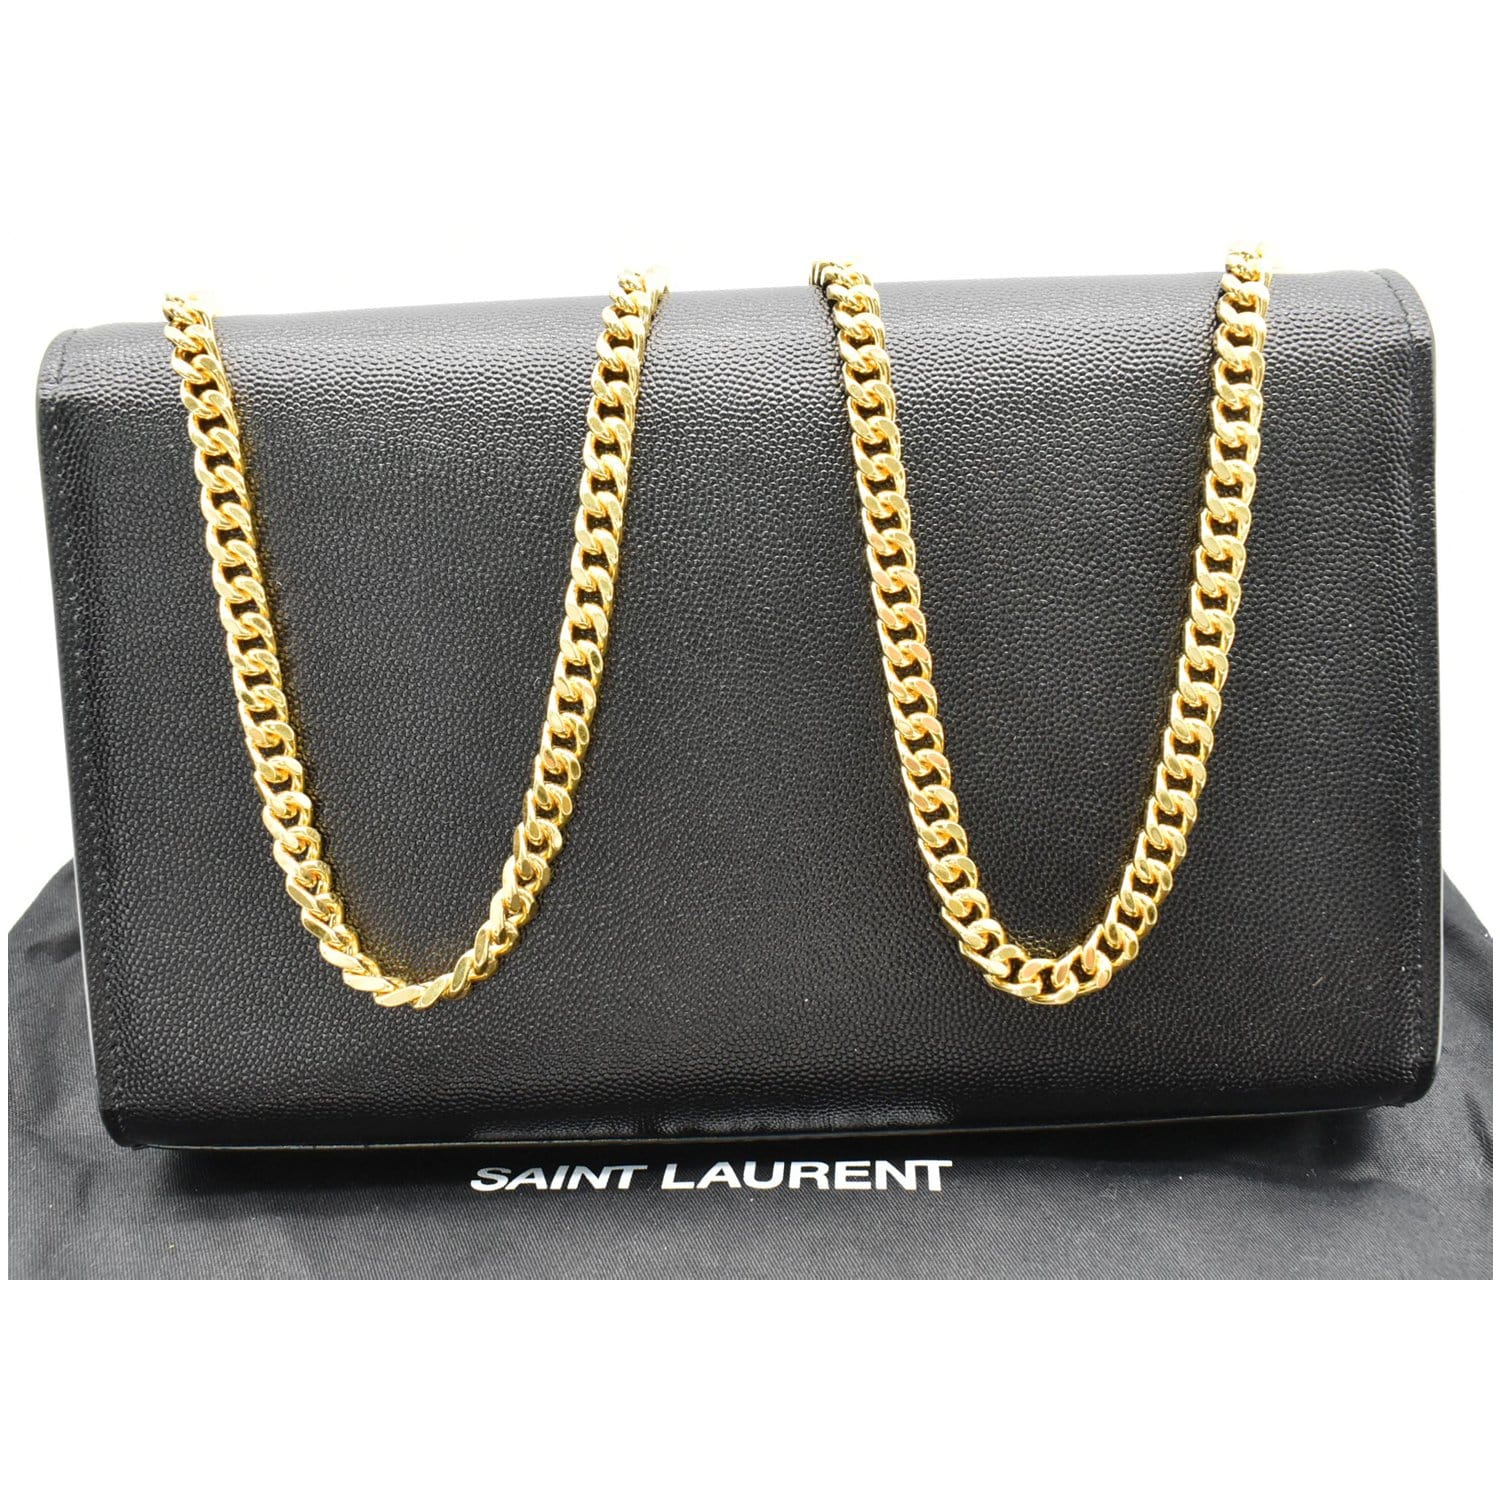 Yves Saint Laurent, Bags, Black And Gold Ysl Sling Bag I Only Use It Time